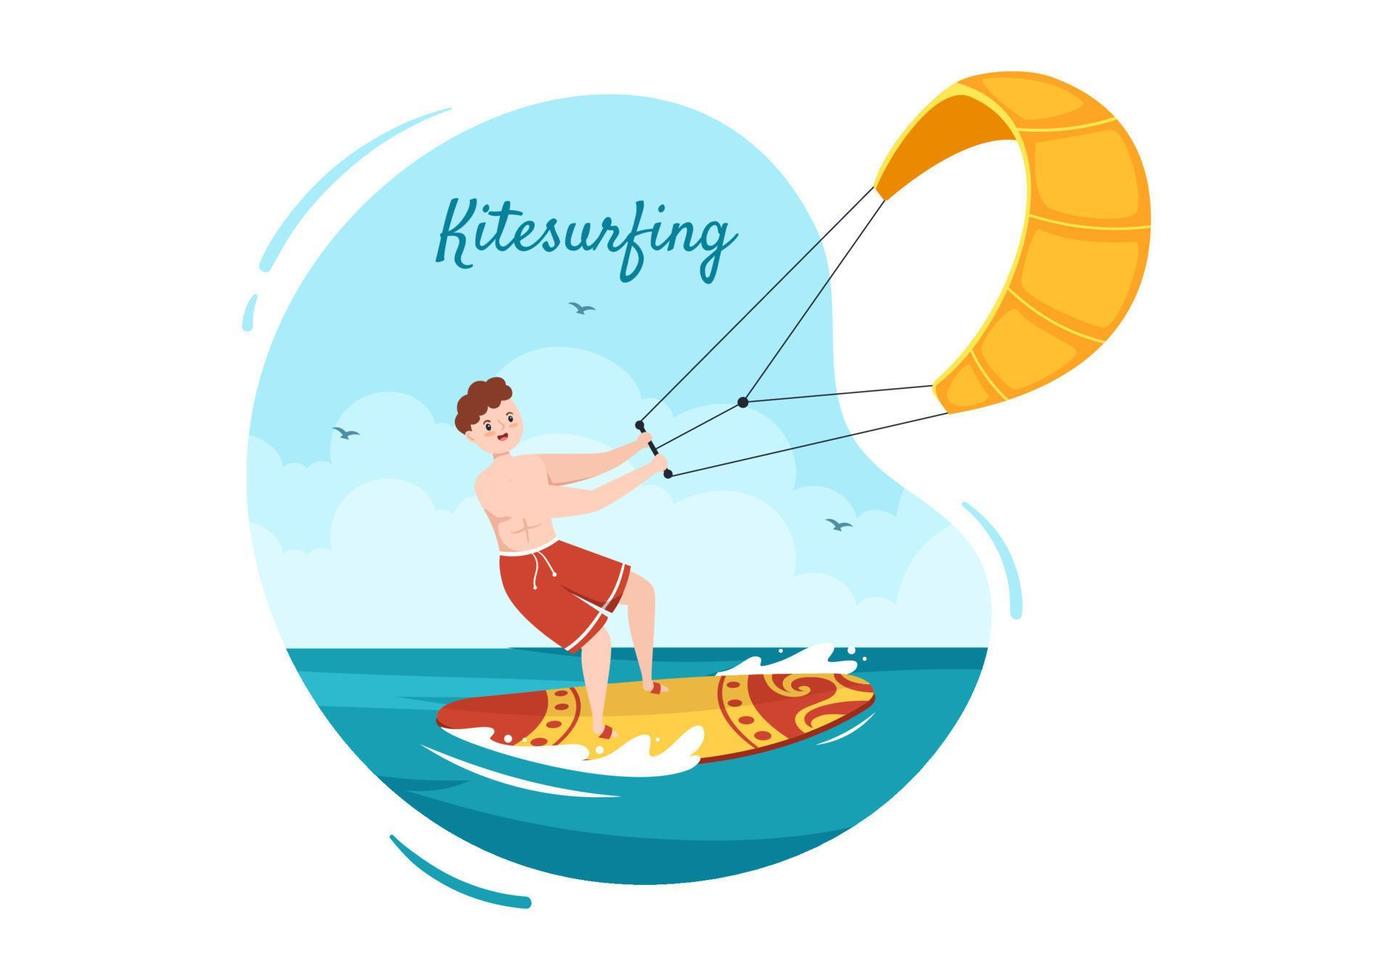 Summer Kitesurfing of Water Sport Activities Cartoon Illustration with Riding a Big Kite on a Board in Flat Style vector